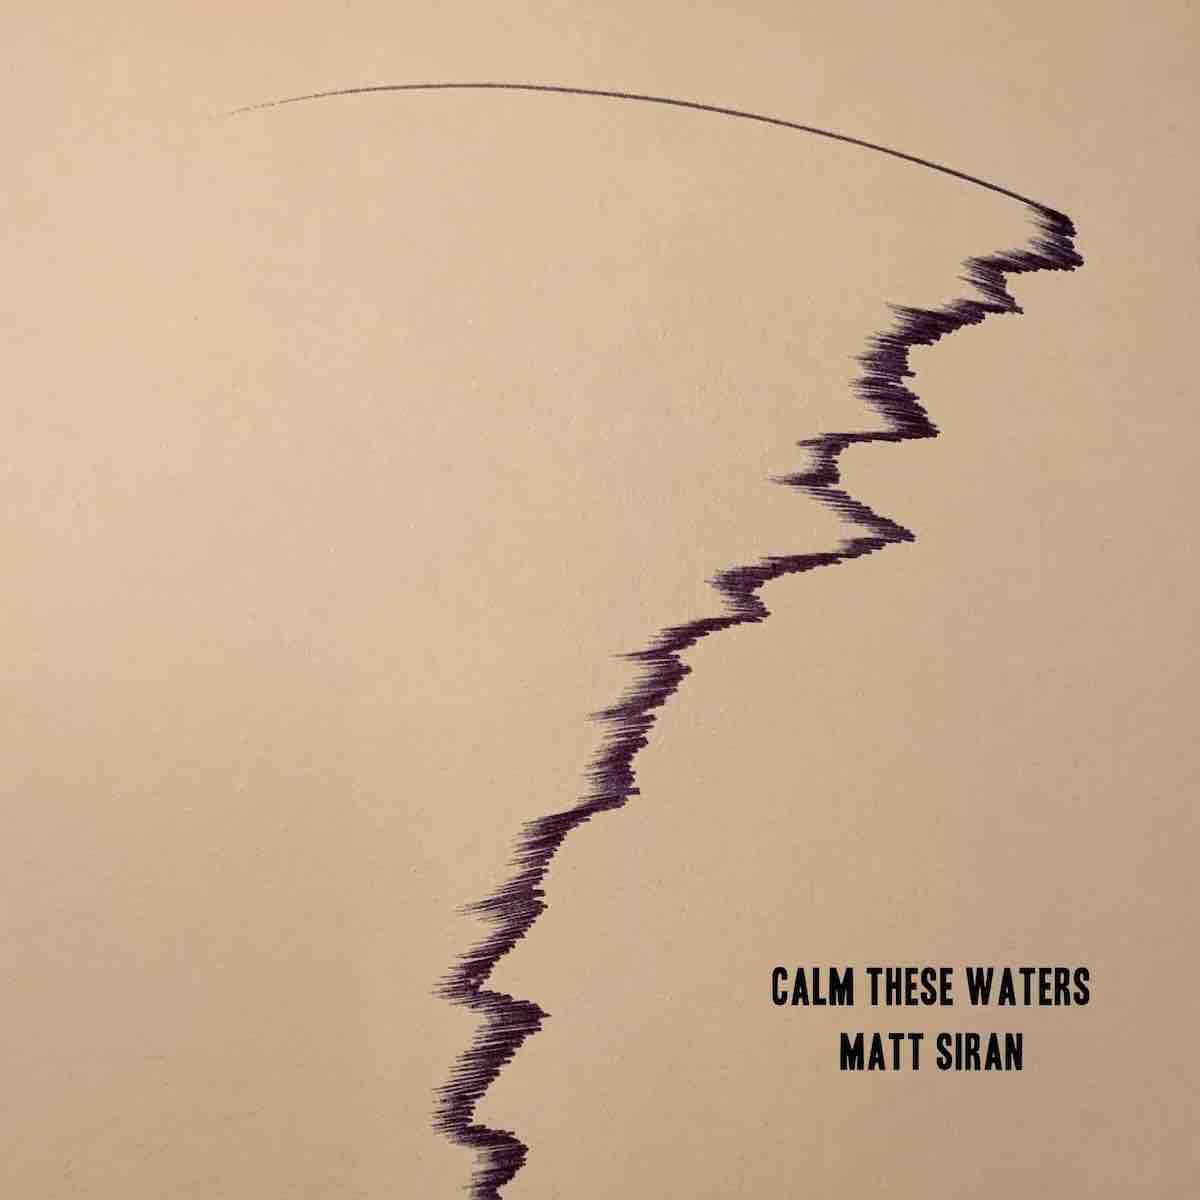 DEBUT SINGLE: “Calm These Waters” by Matt Siran